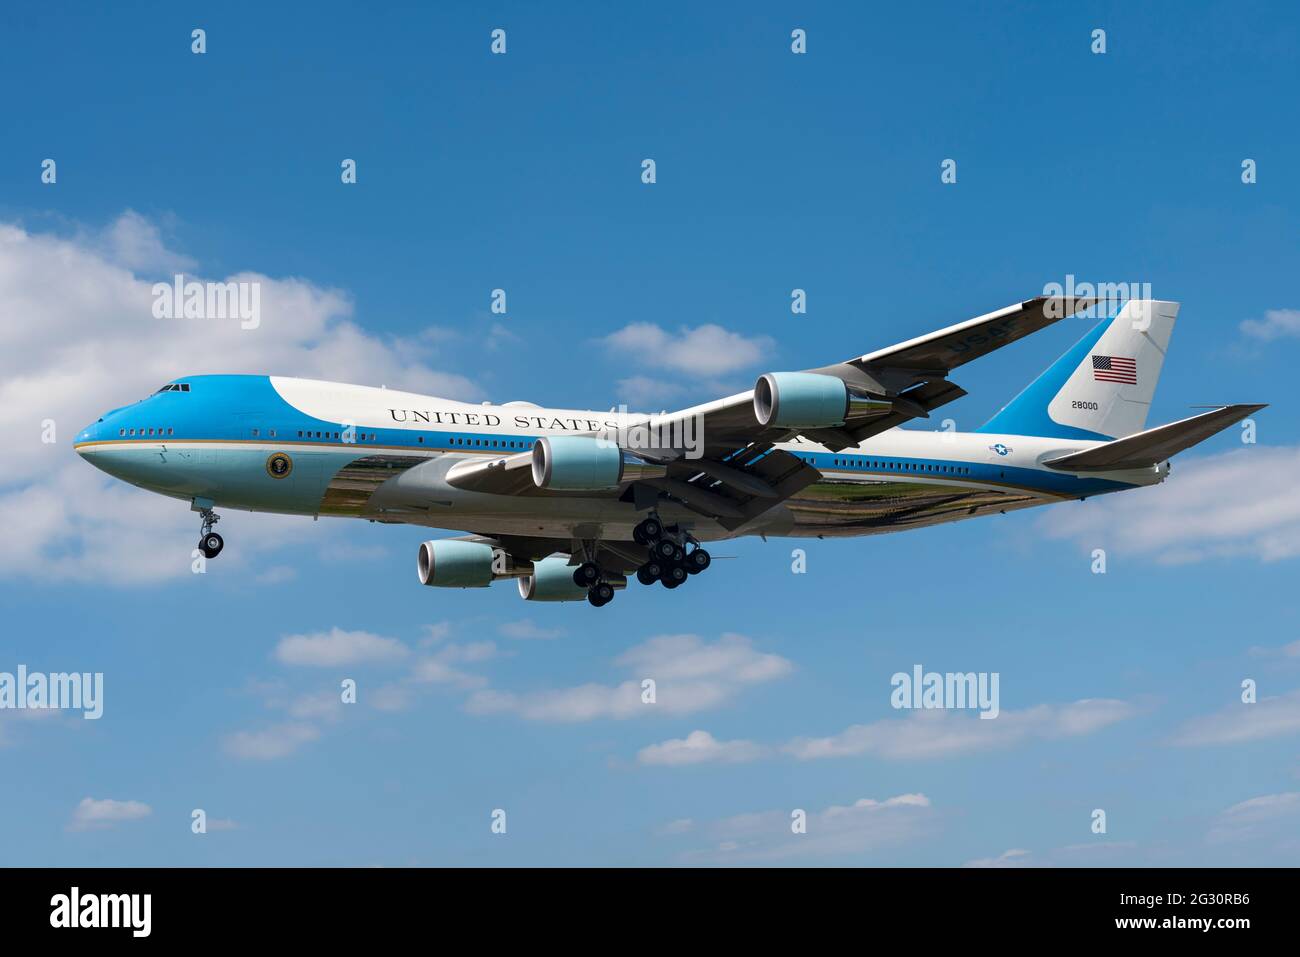 London Heathrow Airport, London, UK. 13th Jun, 2021. US Air Force Boeing VC-25A call sign 'Air Force One' has arrived from Newquay with US president Joe Biden on board for his visit with the Queen. Landing at London Heathrow Airport on a bright sunny day Stock Photo